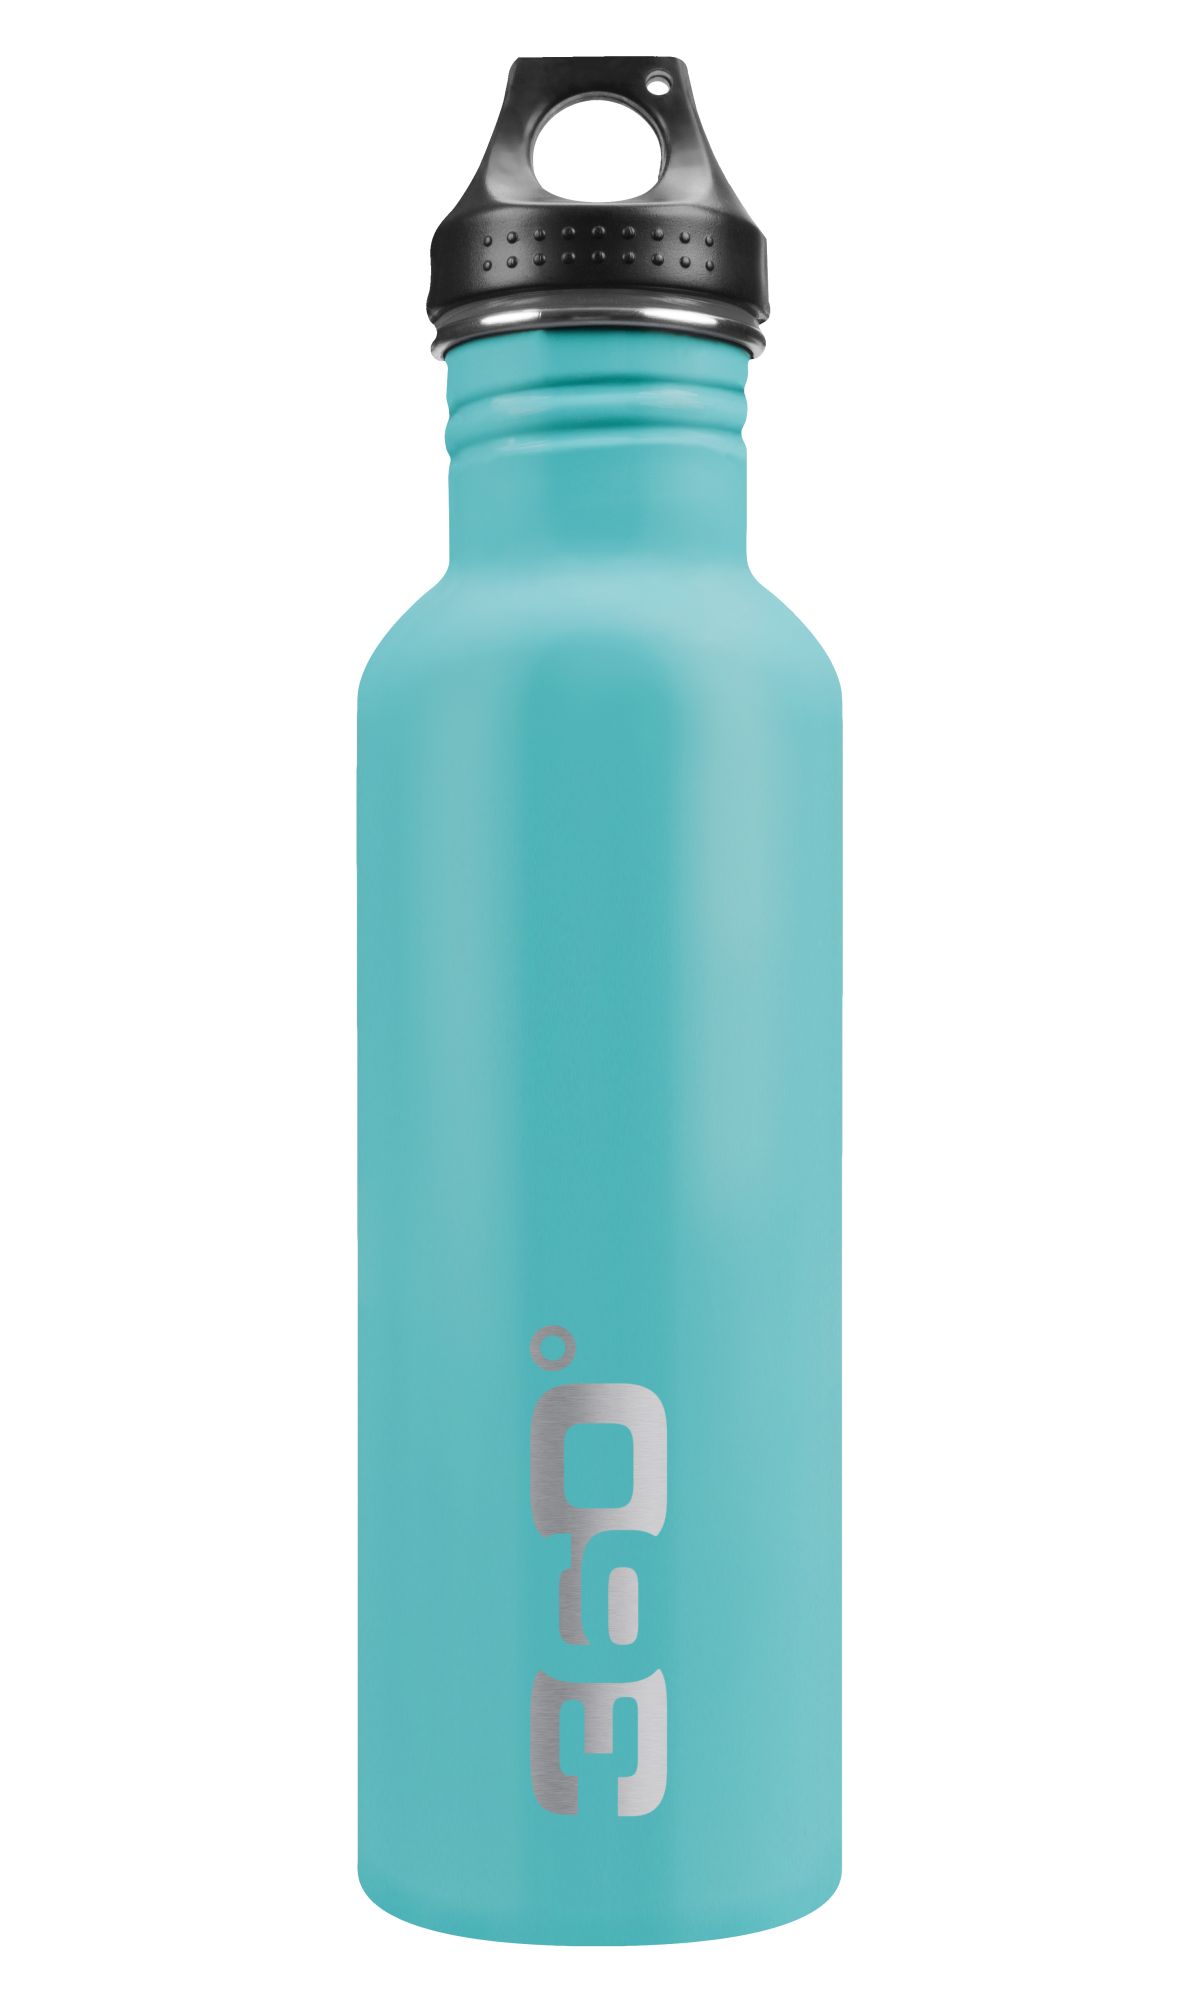 360° Stainless Single Wall Bottle